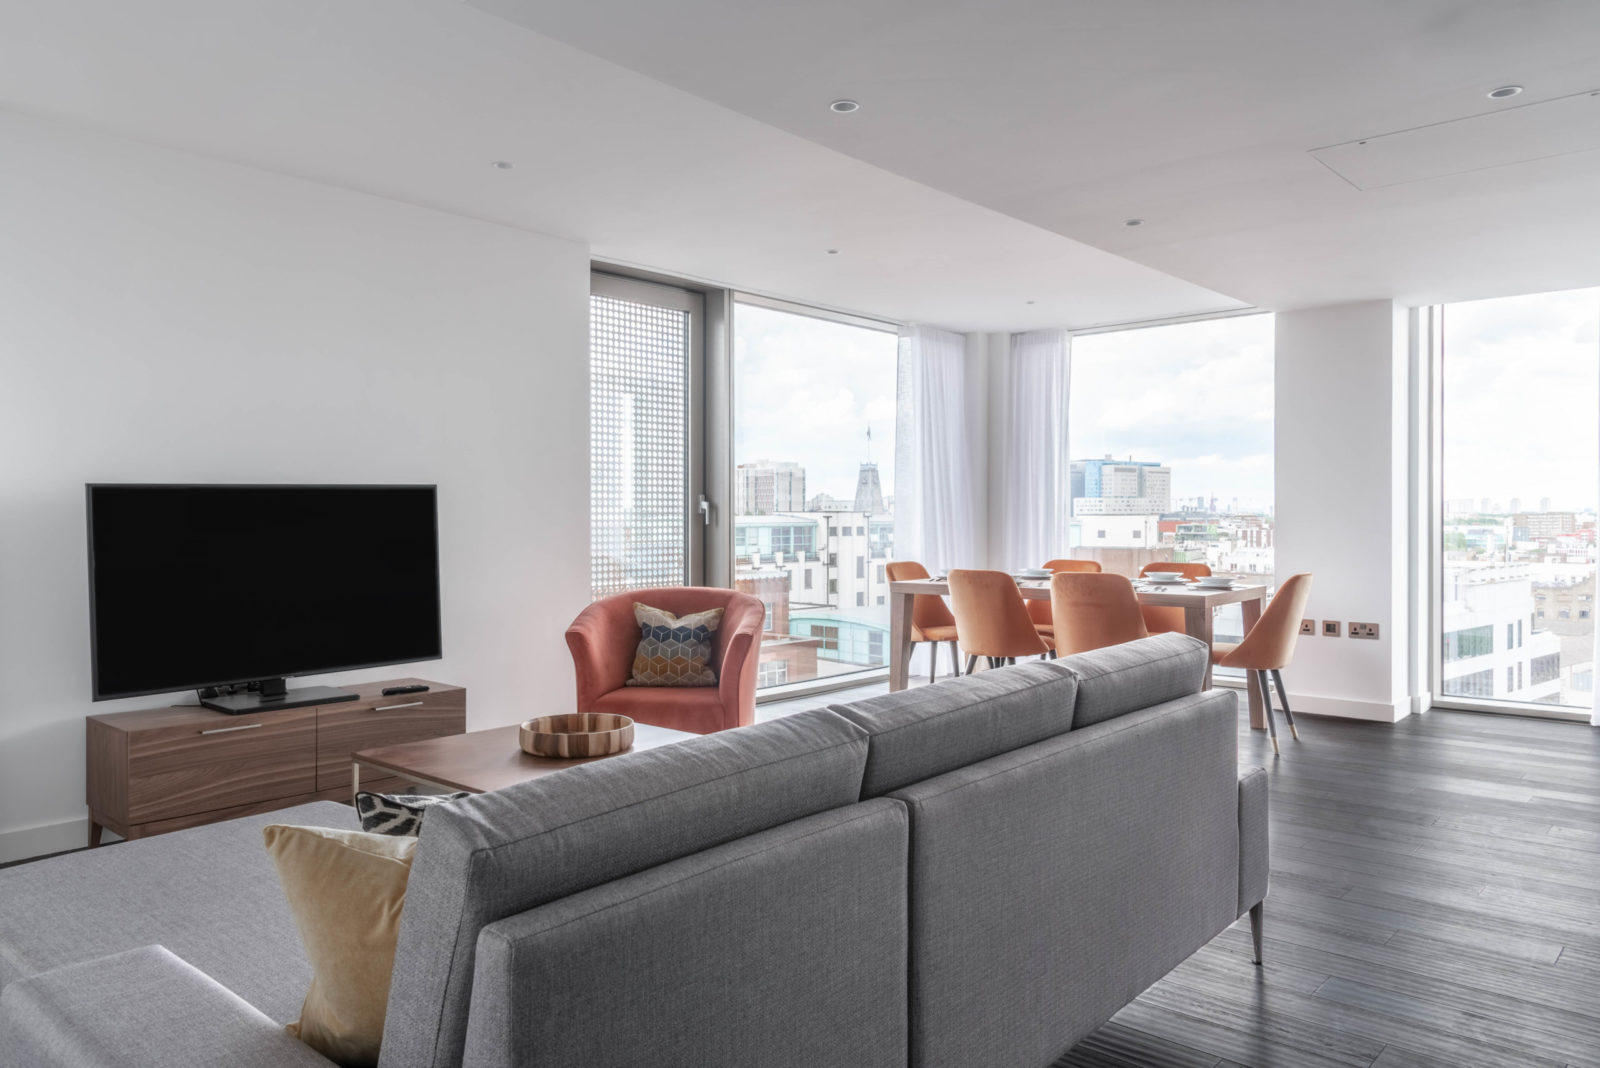 Sitting area with sofa, individual chairs, a tv and a dining table with chairs in the background. Room has large floor to ceiling windows with views of London.